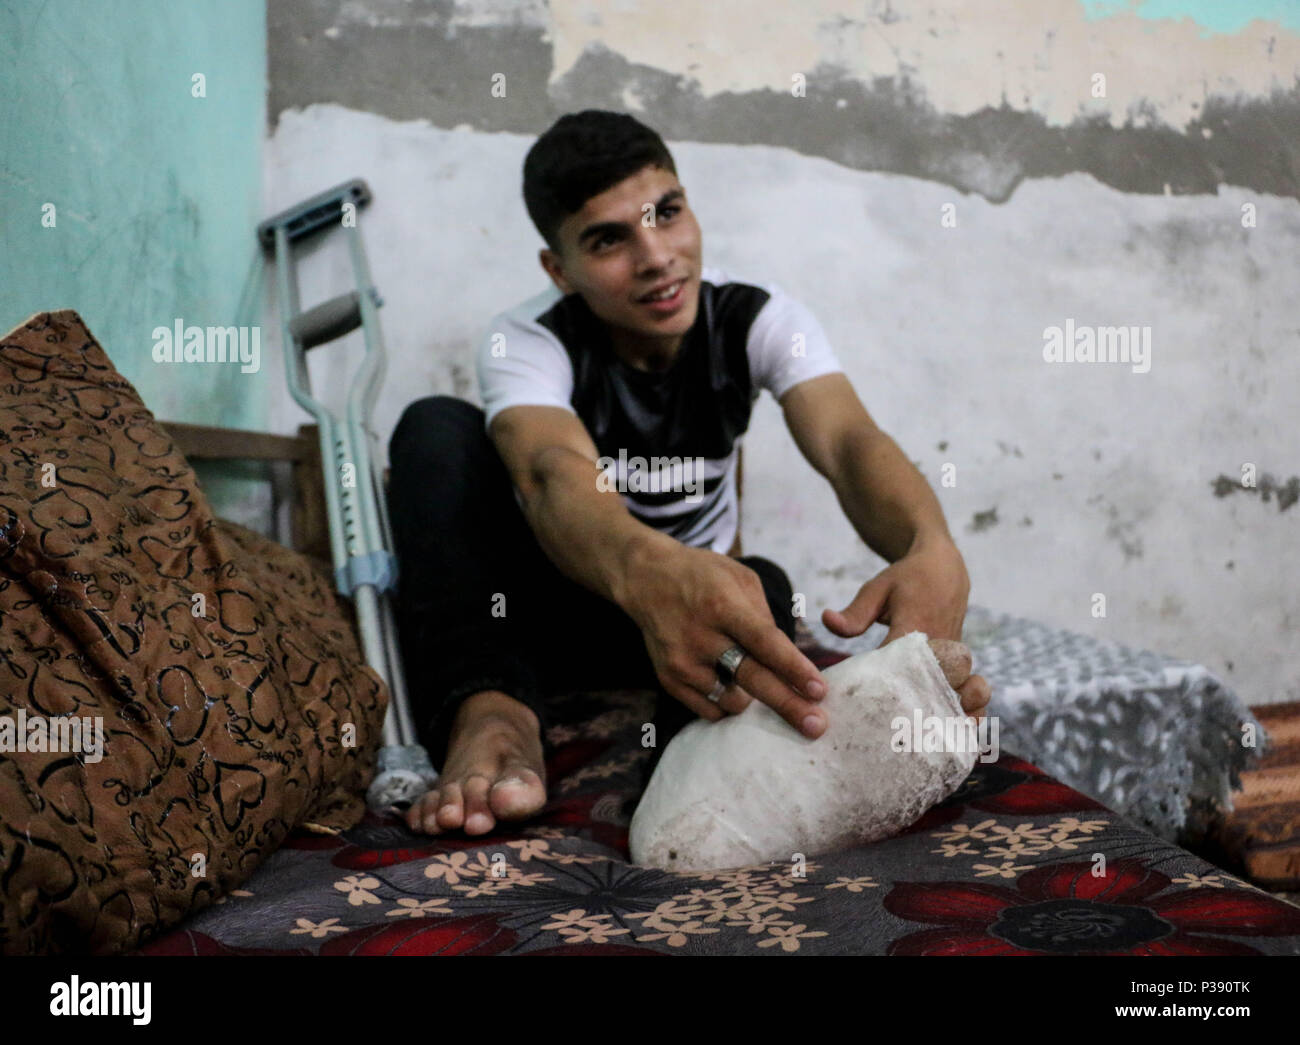 Ahmed puts his hand on his foot in his home in al-Bureij refugee camp, the  second day of Eid al-Fitr, celebrated by Muslims. Ahmed Jawad Mahmoud  Othman a 19-year-old Palestinian youth from